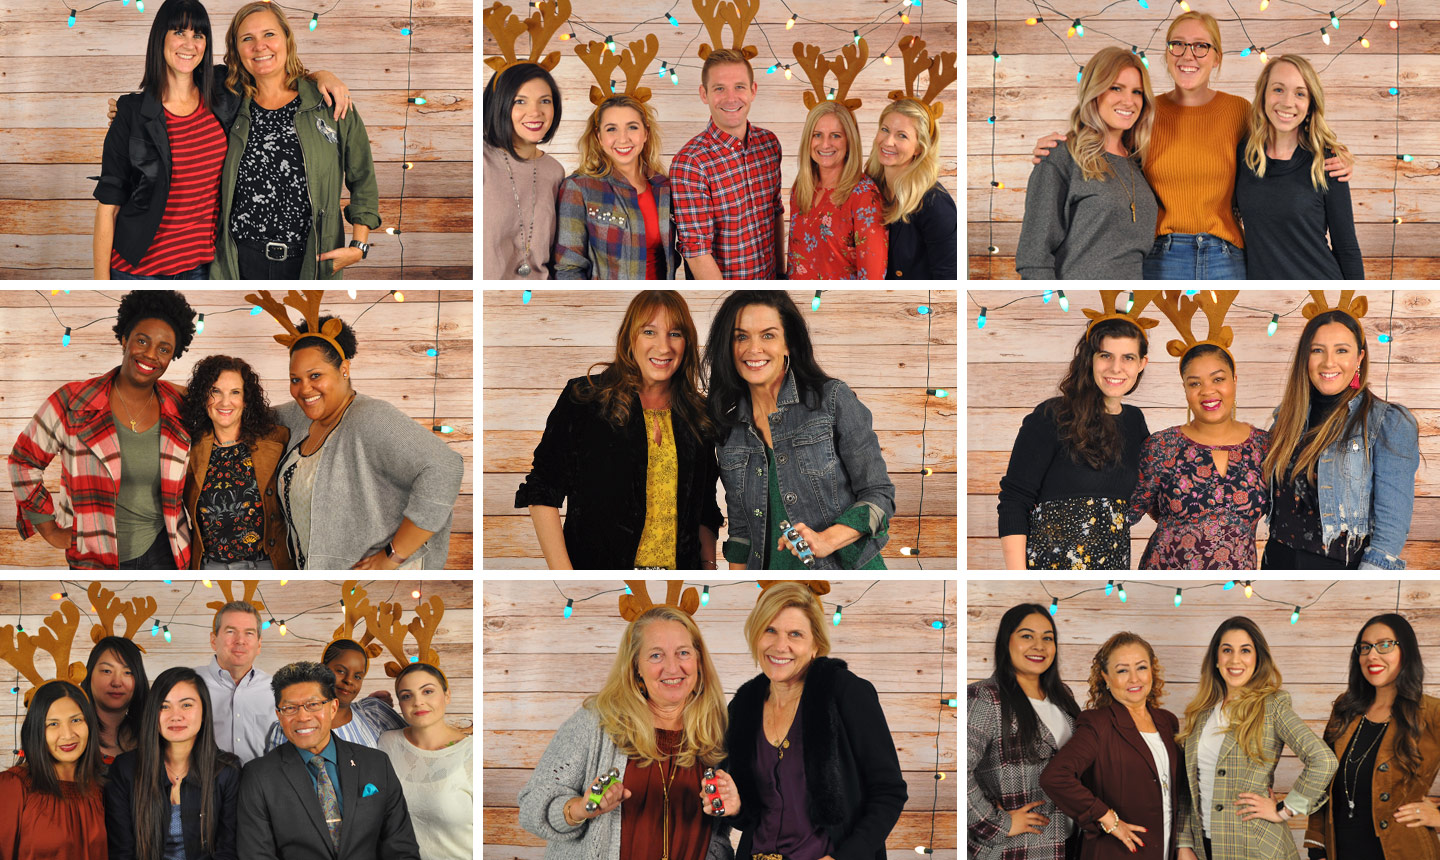 jingle all the way! happy holidays from cabi!